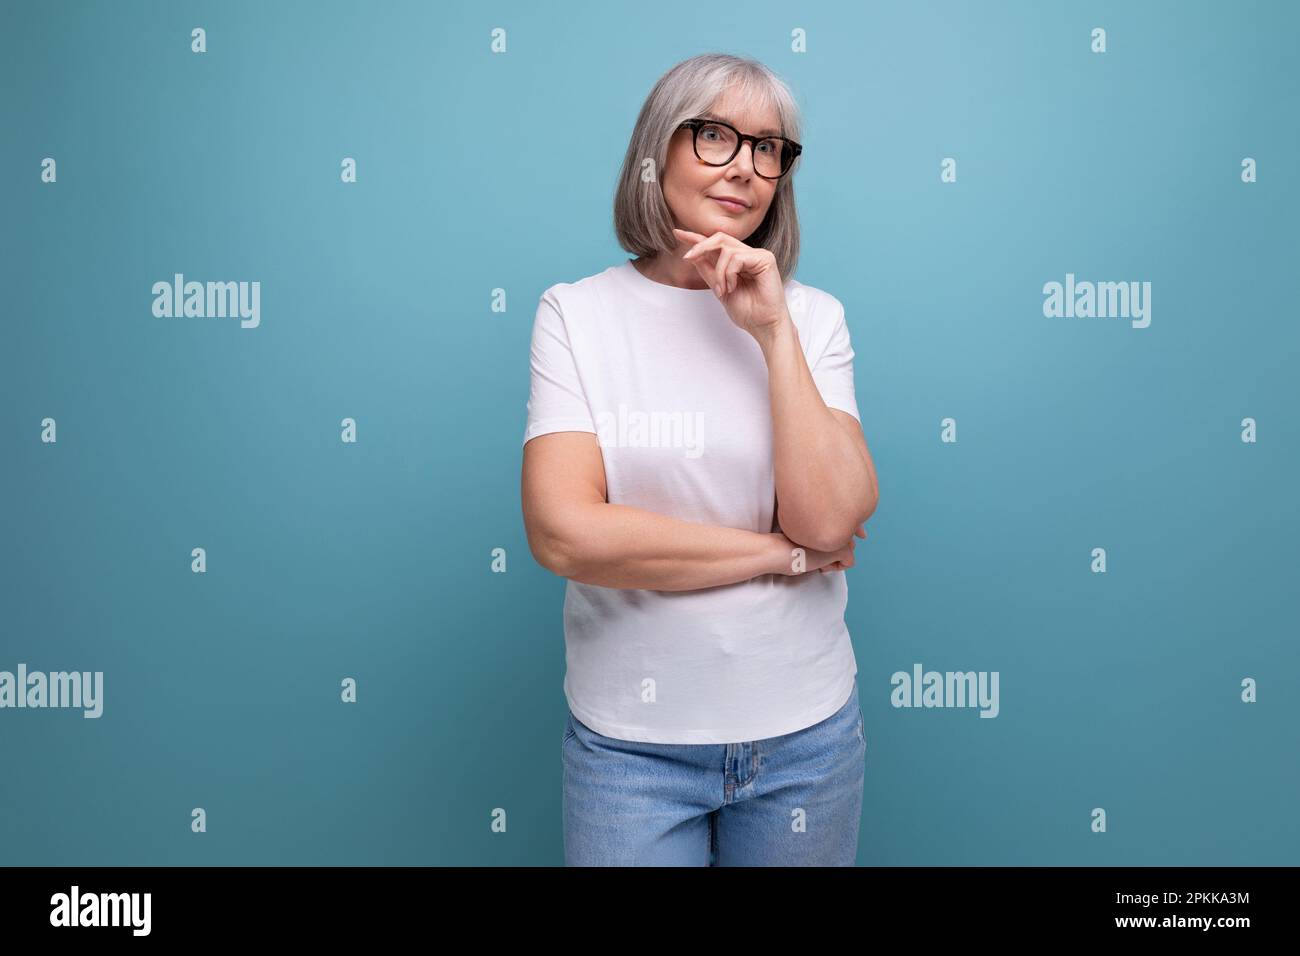 serious 60s woman pensioner in white tank top on studio background Stock Photo